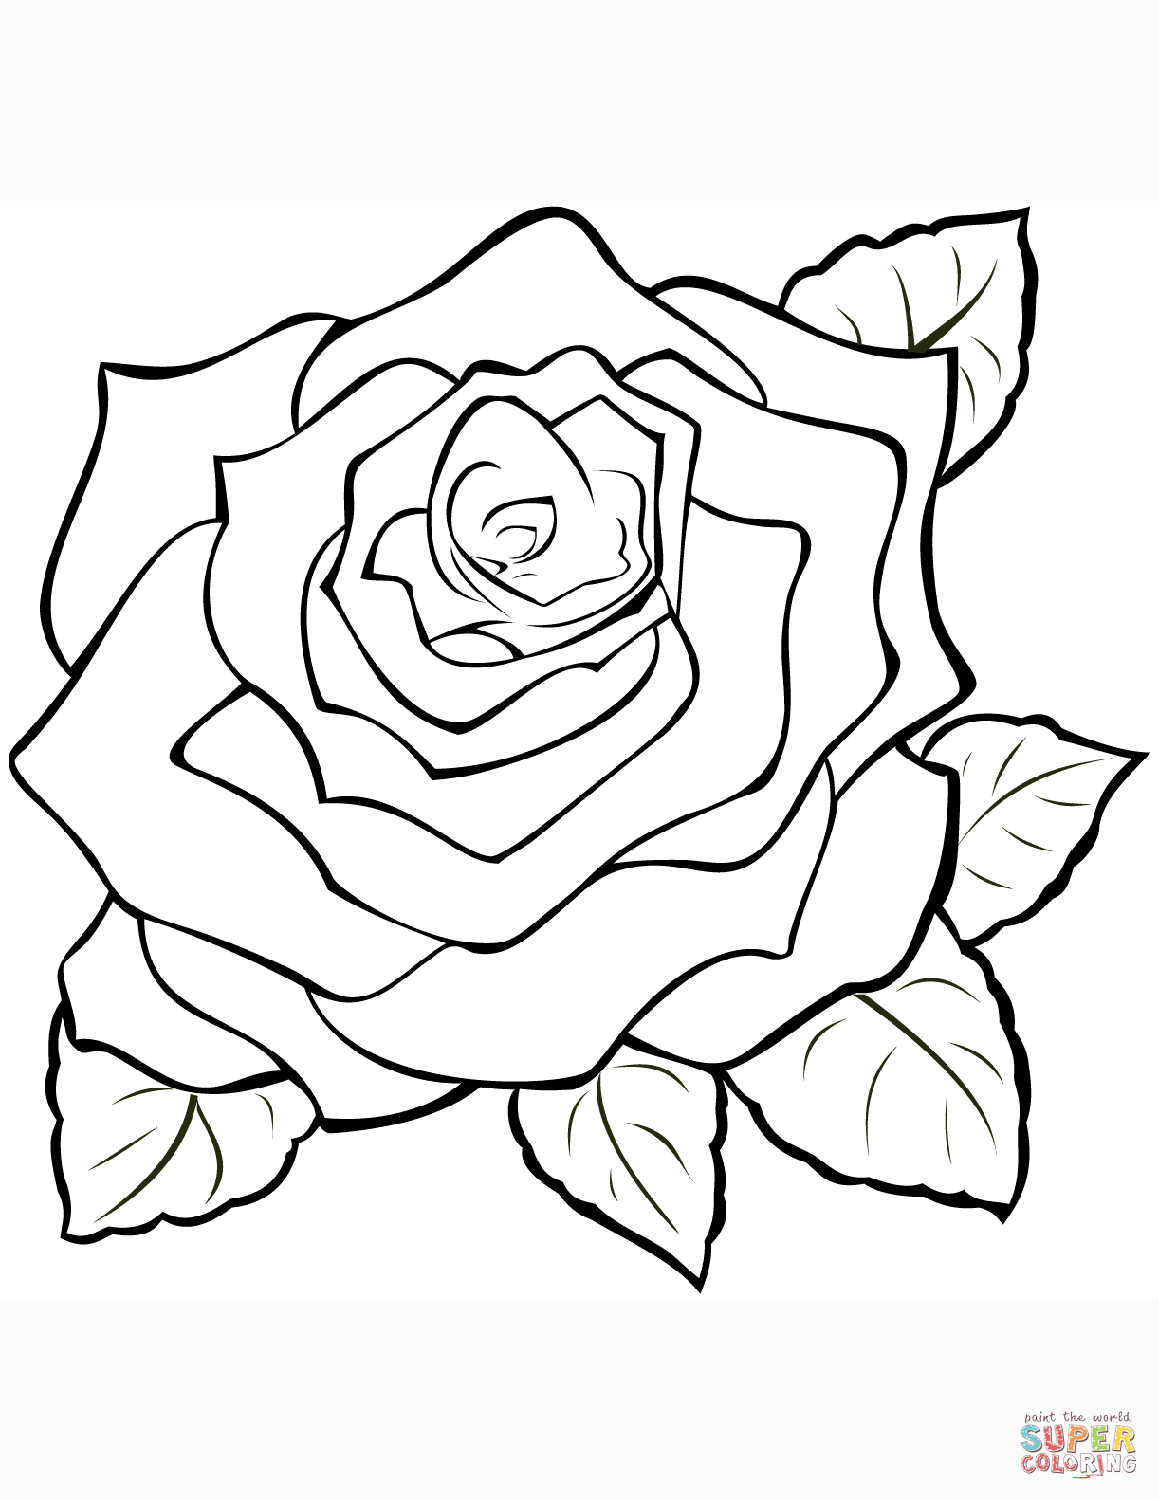 rose coloring pages roses coloring pages coloring pages for kids and adults